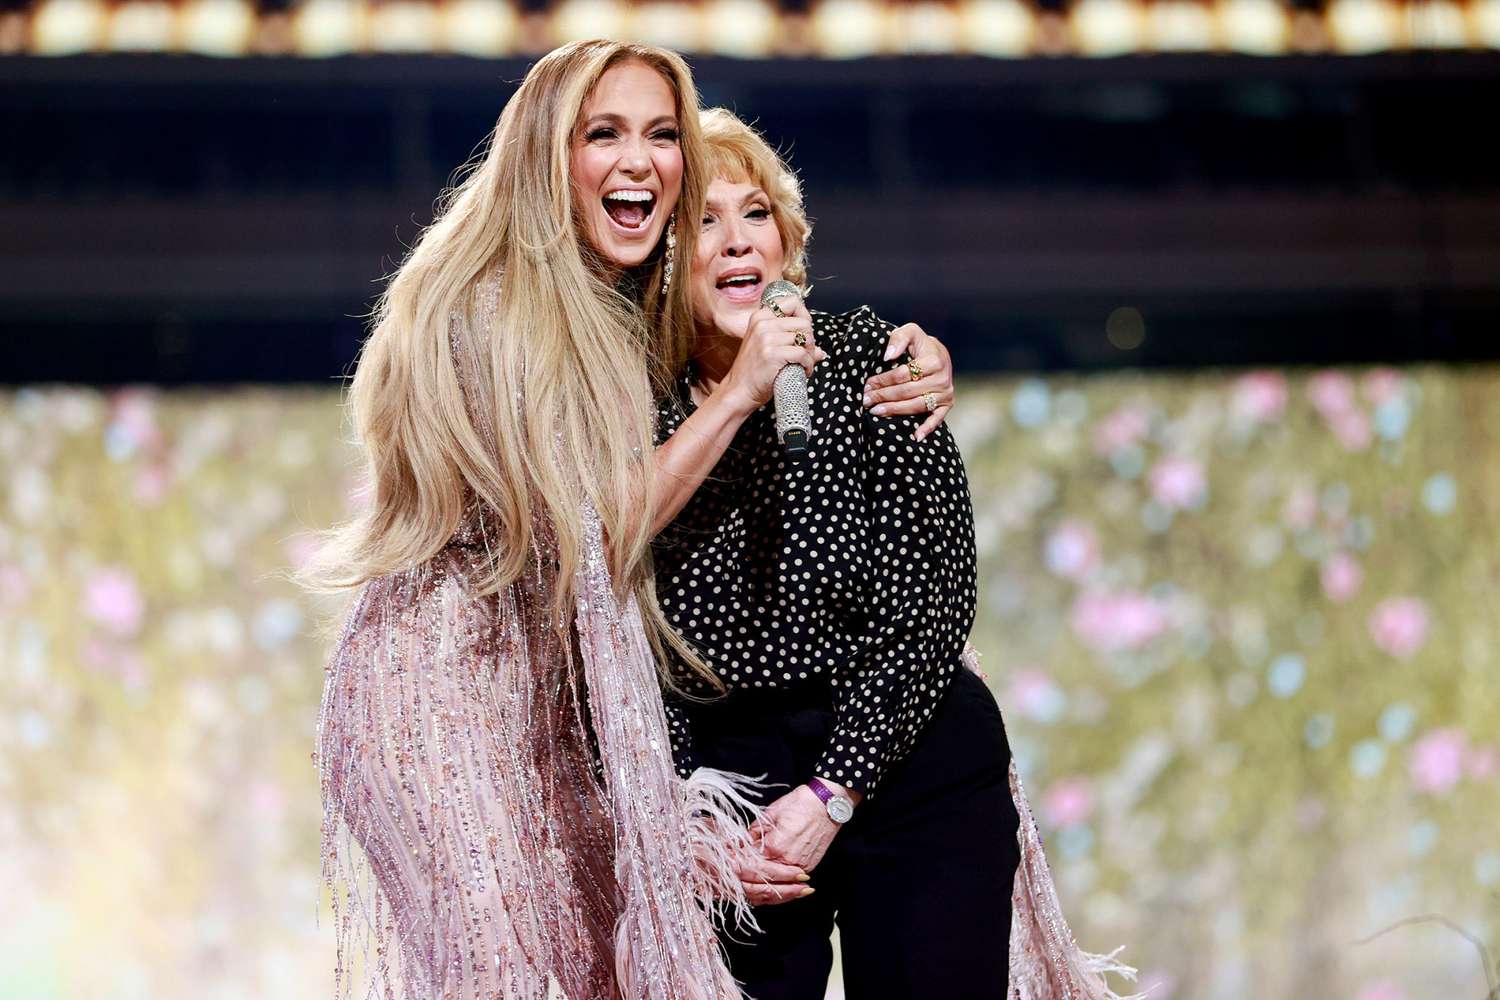 Jennifer Lopez and Guadalupe Rodríguez perform onstage during Global Citizen VAX LIVE: The Concert To Reunite The World at SoFi Stadium in Inglewood, California. Global Citizen VAX LIVE: The Concert To Reunite The World will be broadcast on May 8, 2021